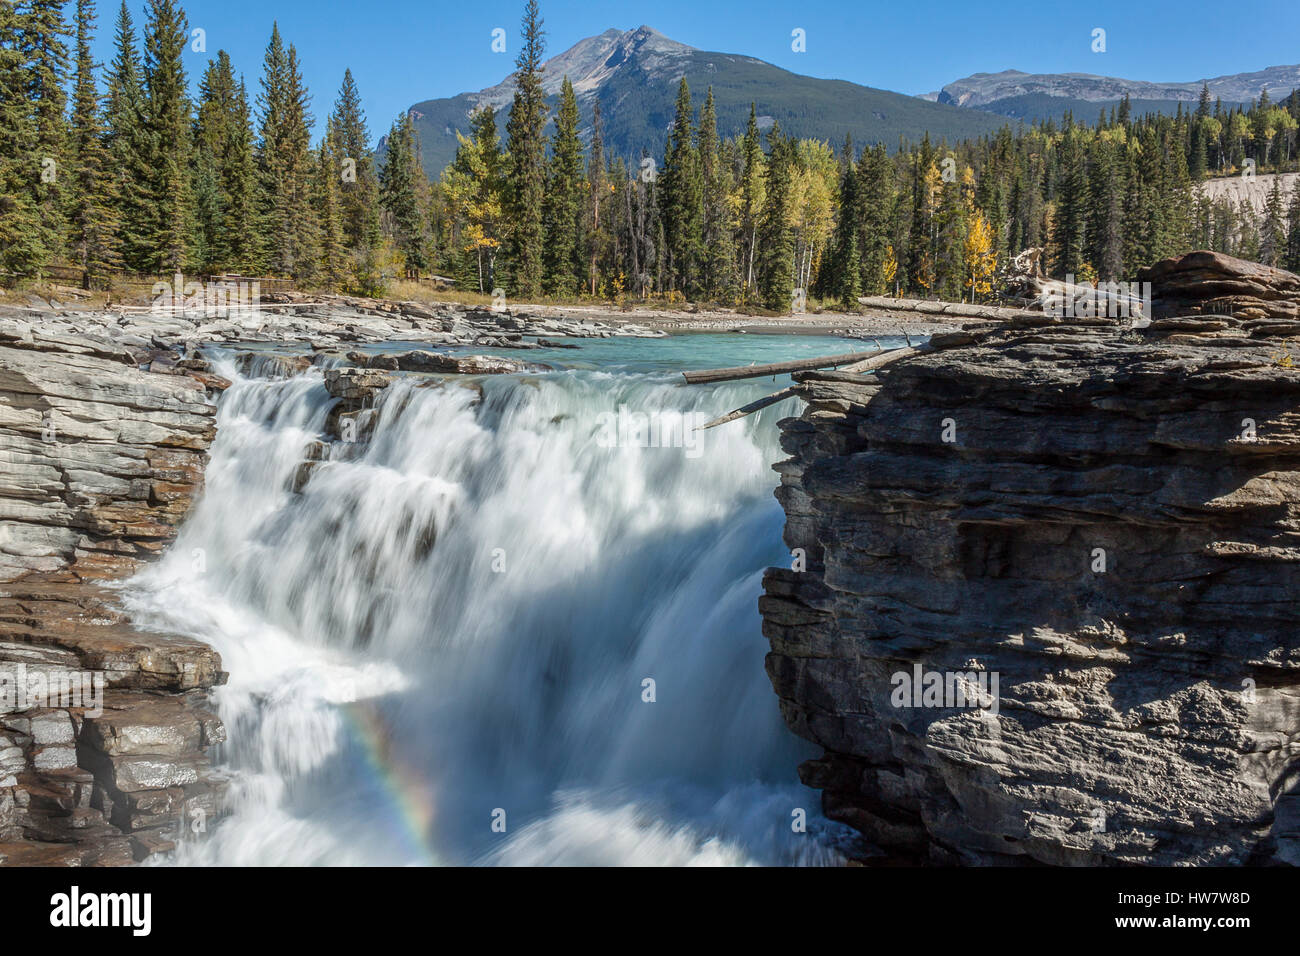 Arcobaleno in Cascate Athabasca, Jasper National Park, Canada. Foto Stock